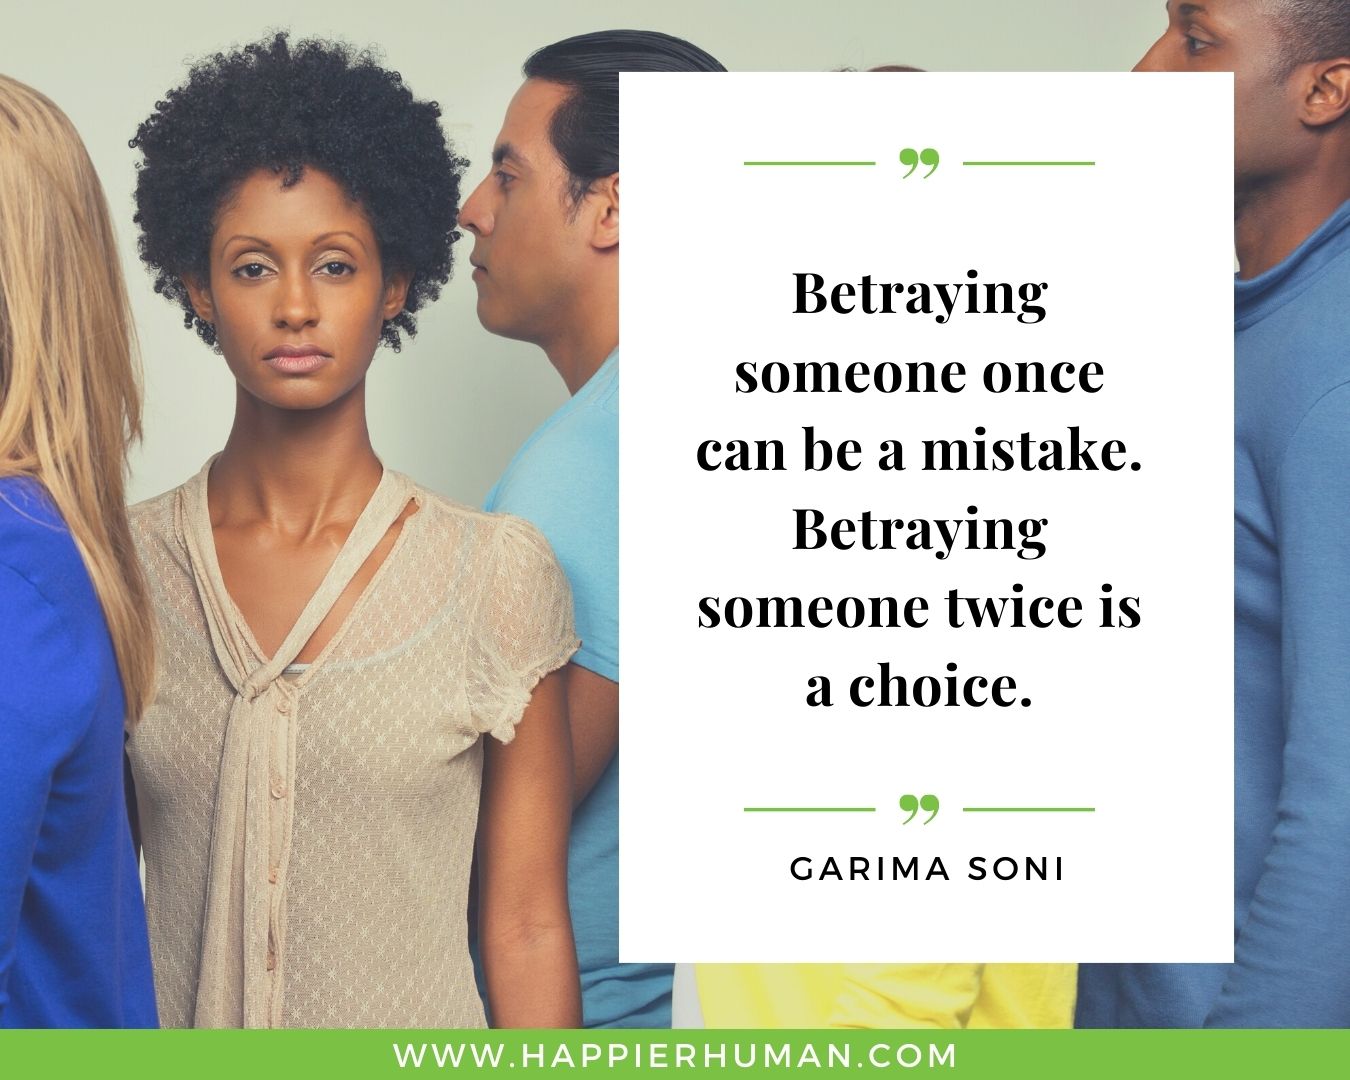 Broken Trust Quotes - “Betraying someone once can be a mistake. Betraying someone twice is a choice.” - Garima Soni